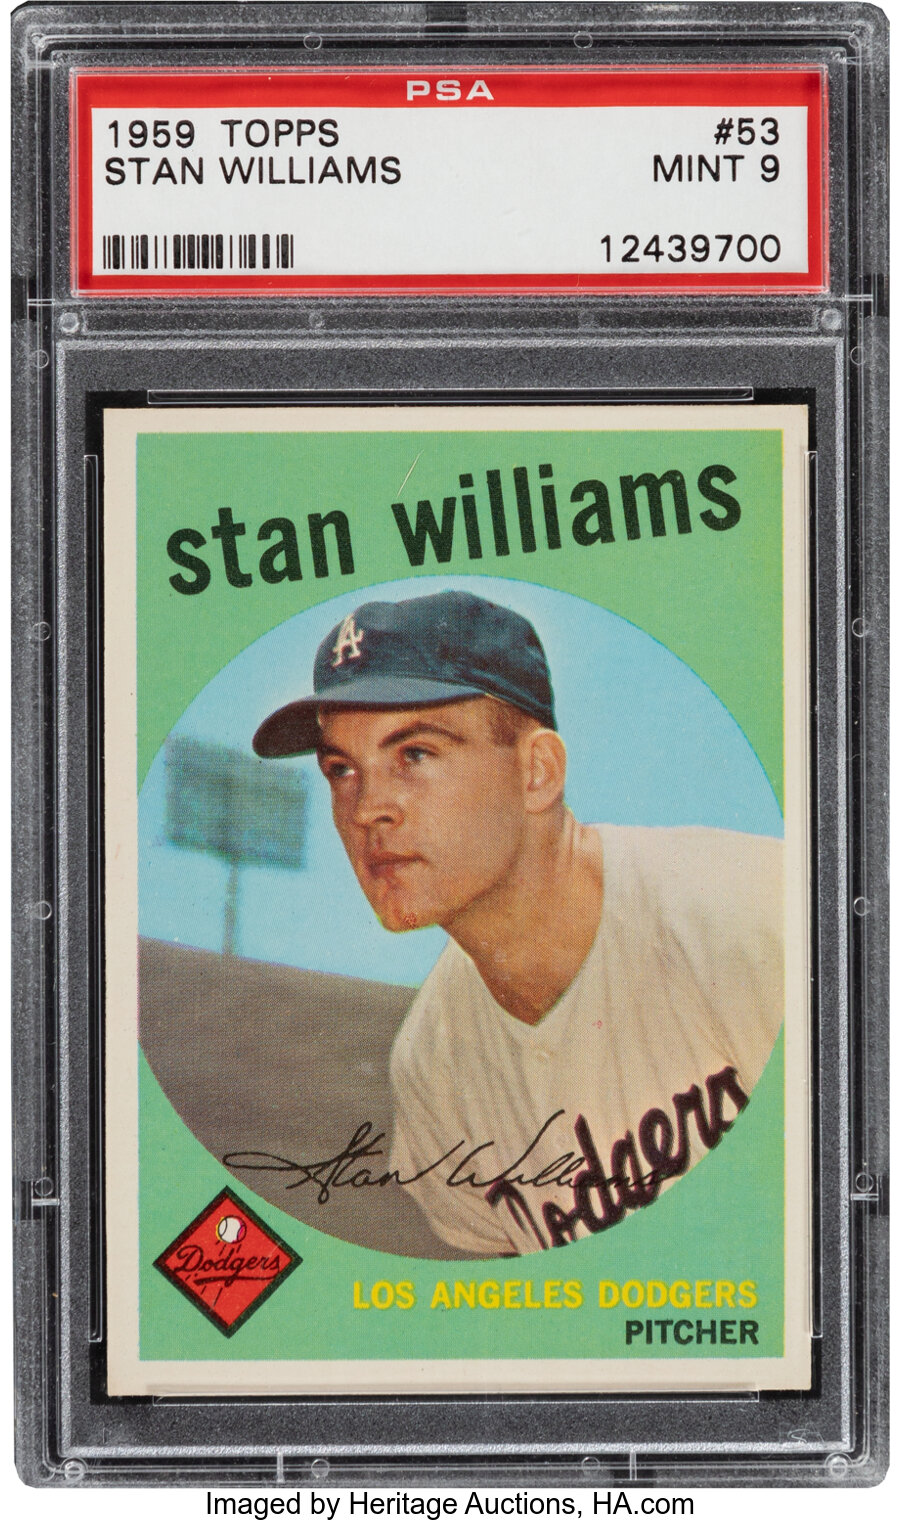 1959 Topps Stan Williams #53 PSA Mint 9 - None Higher!